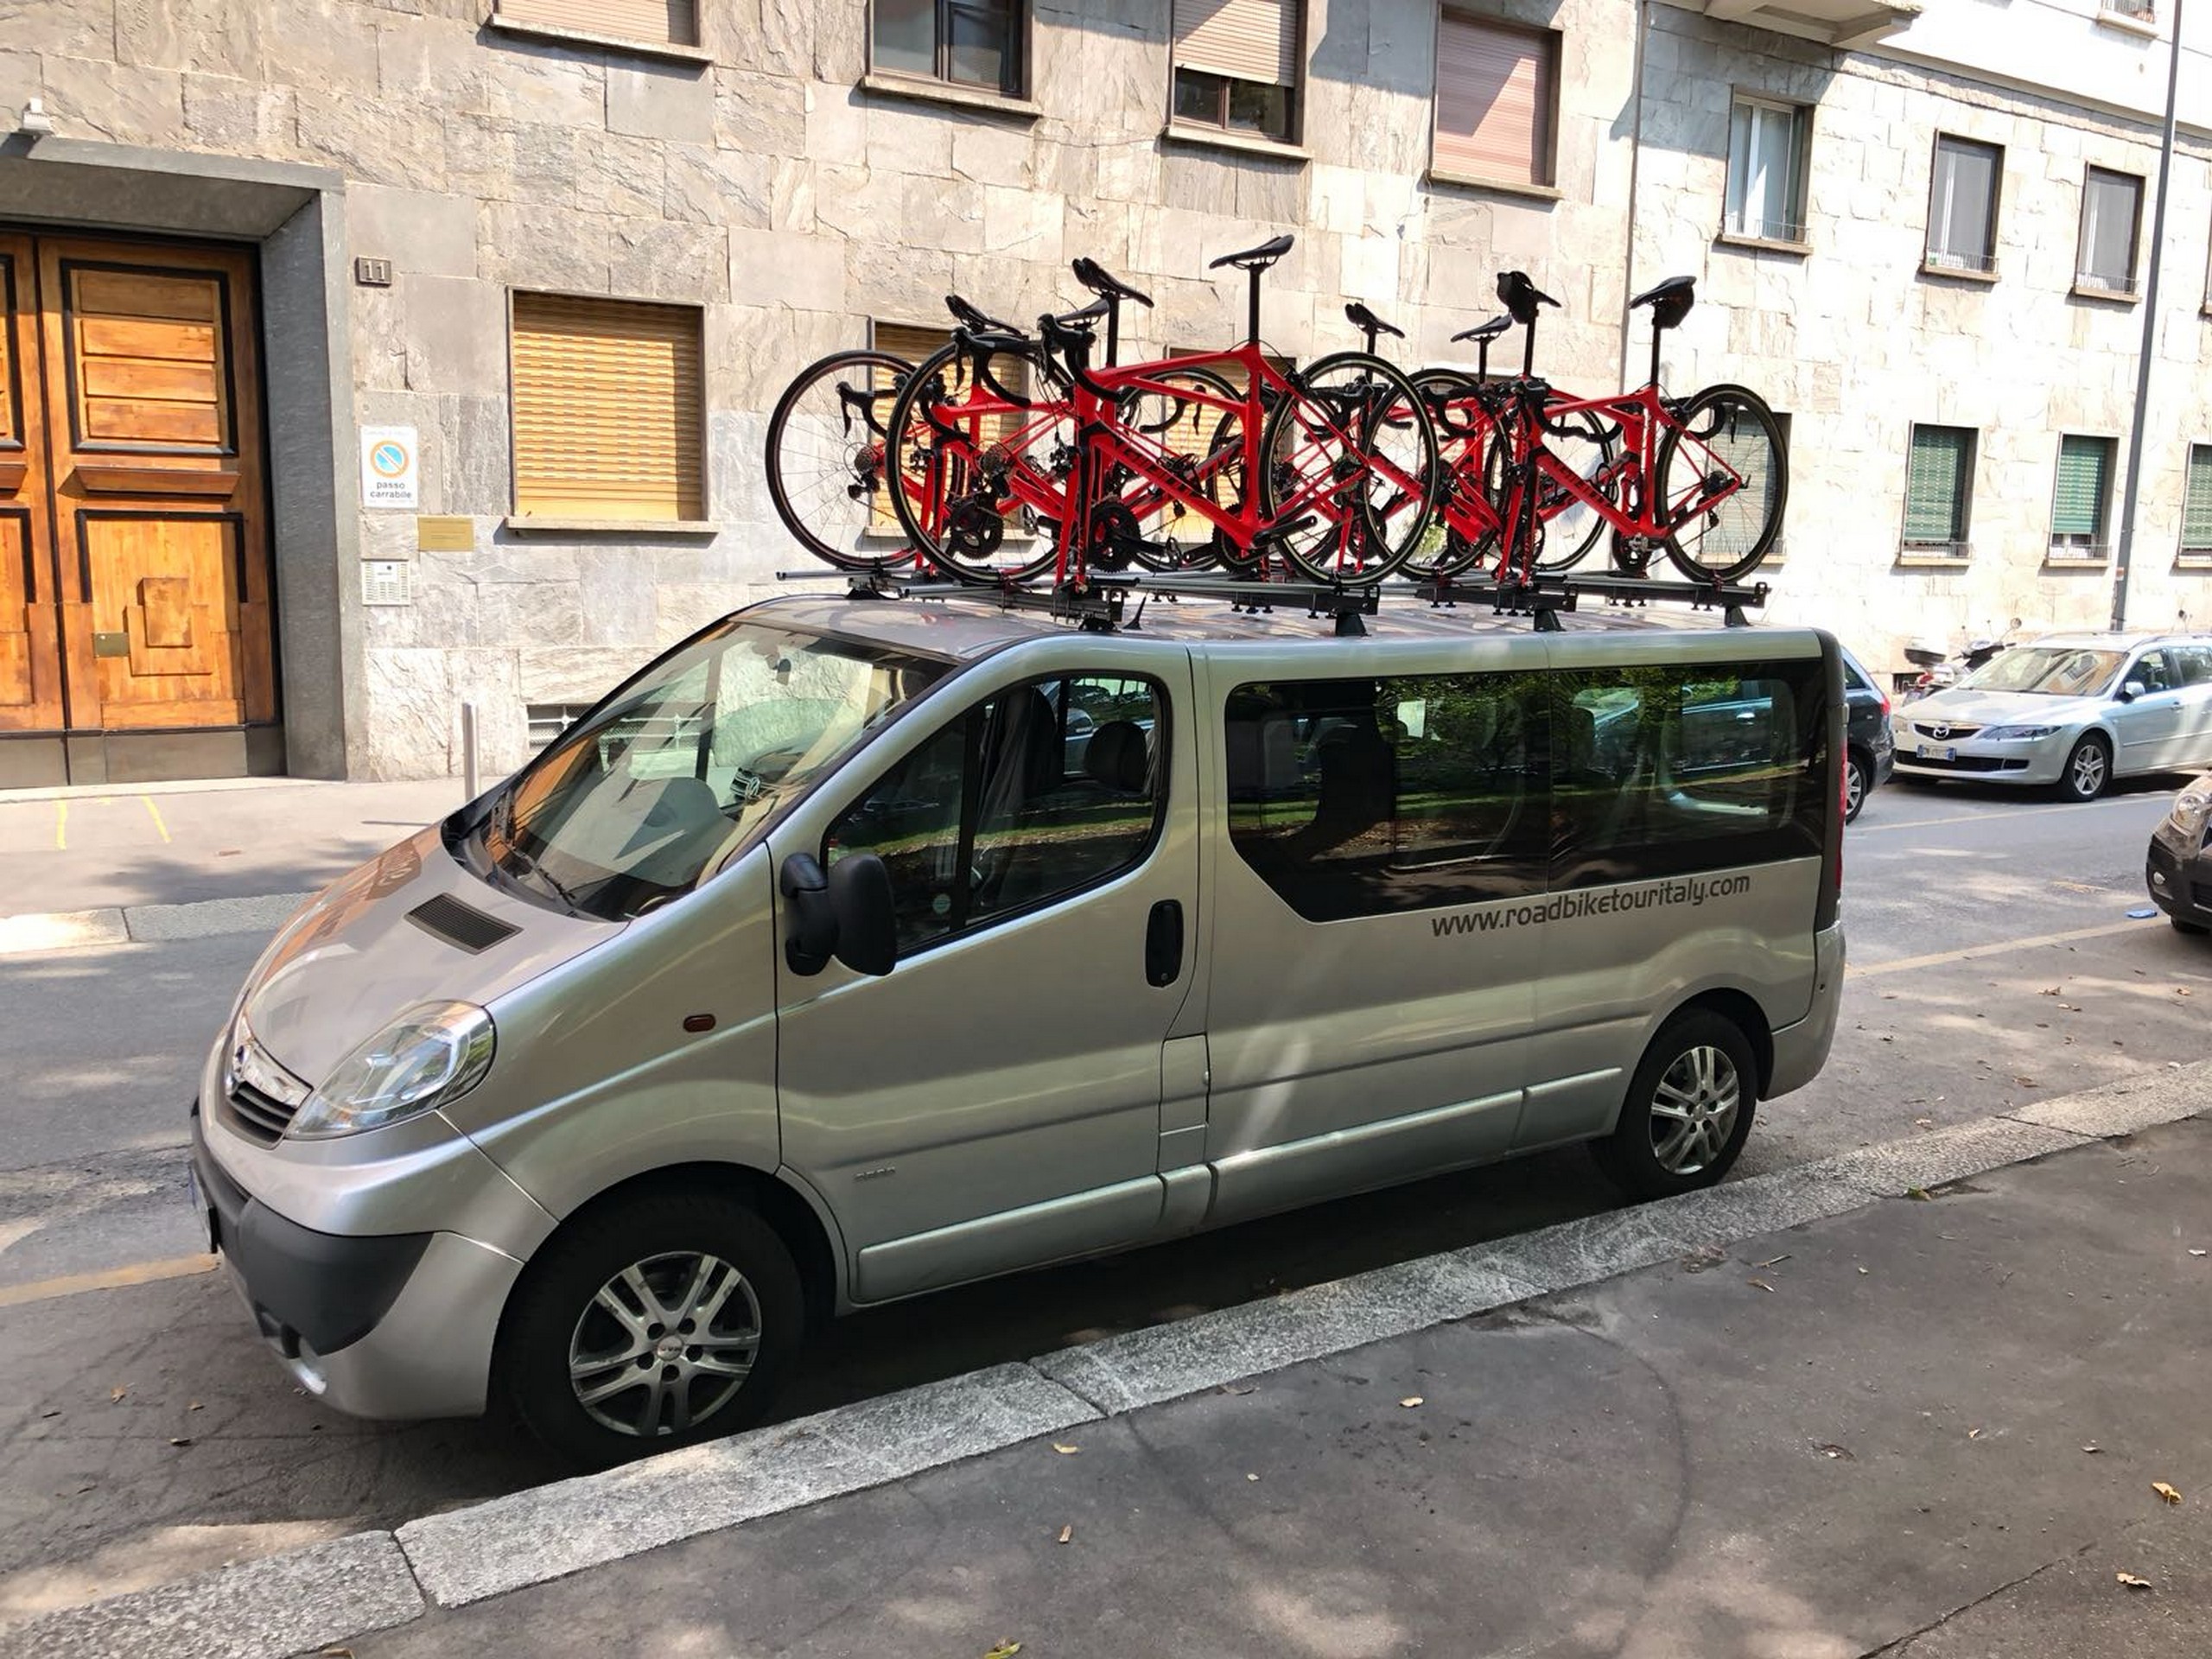 Support van in Tuscany